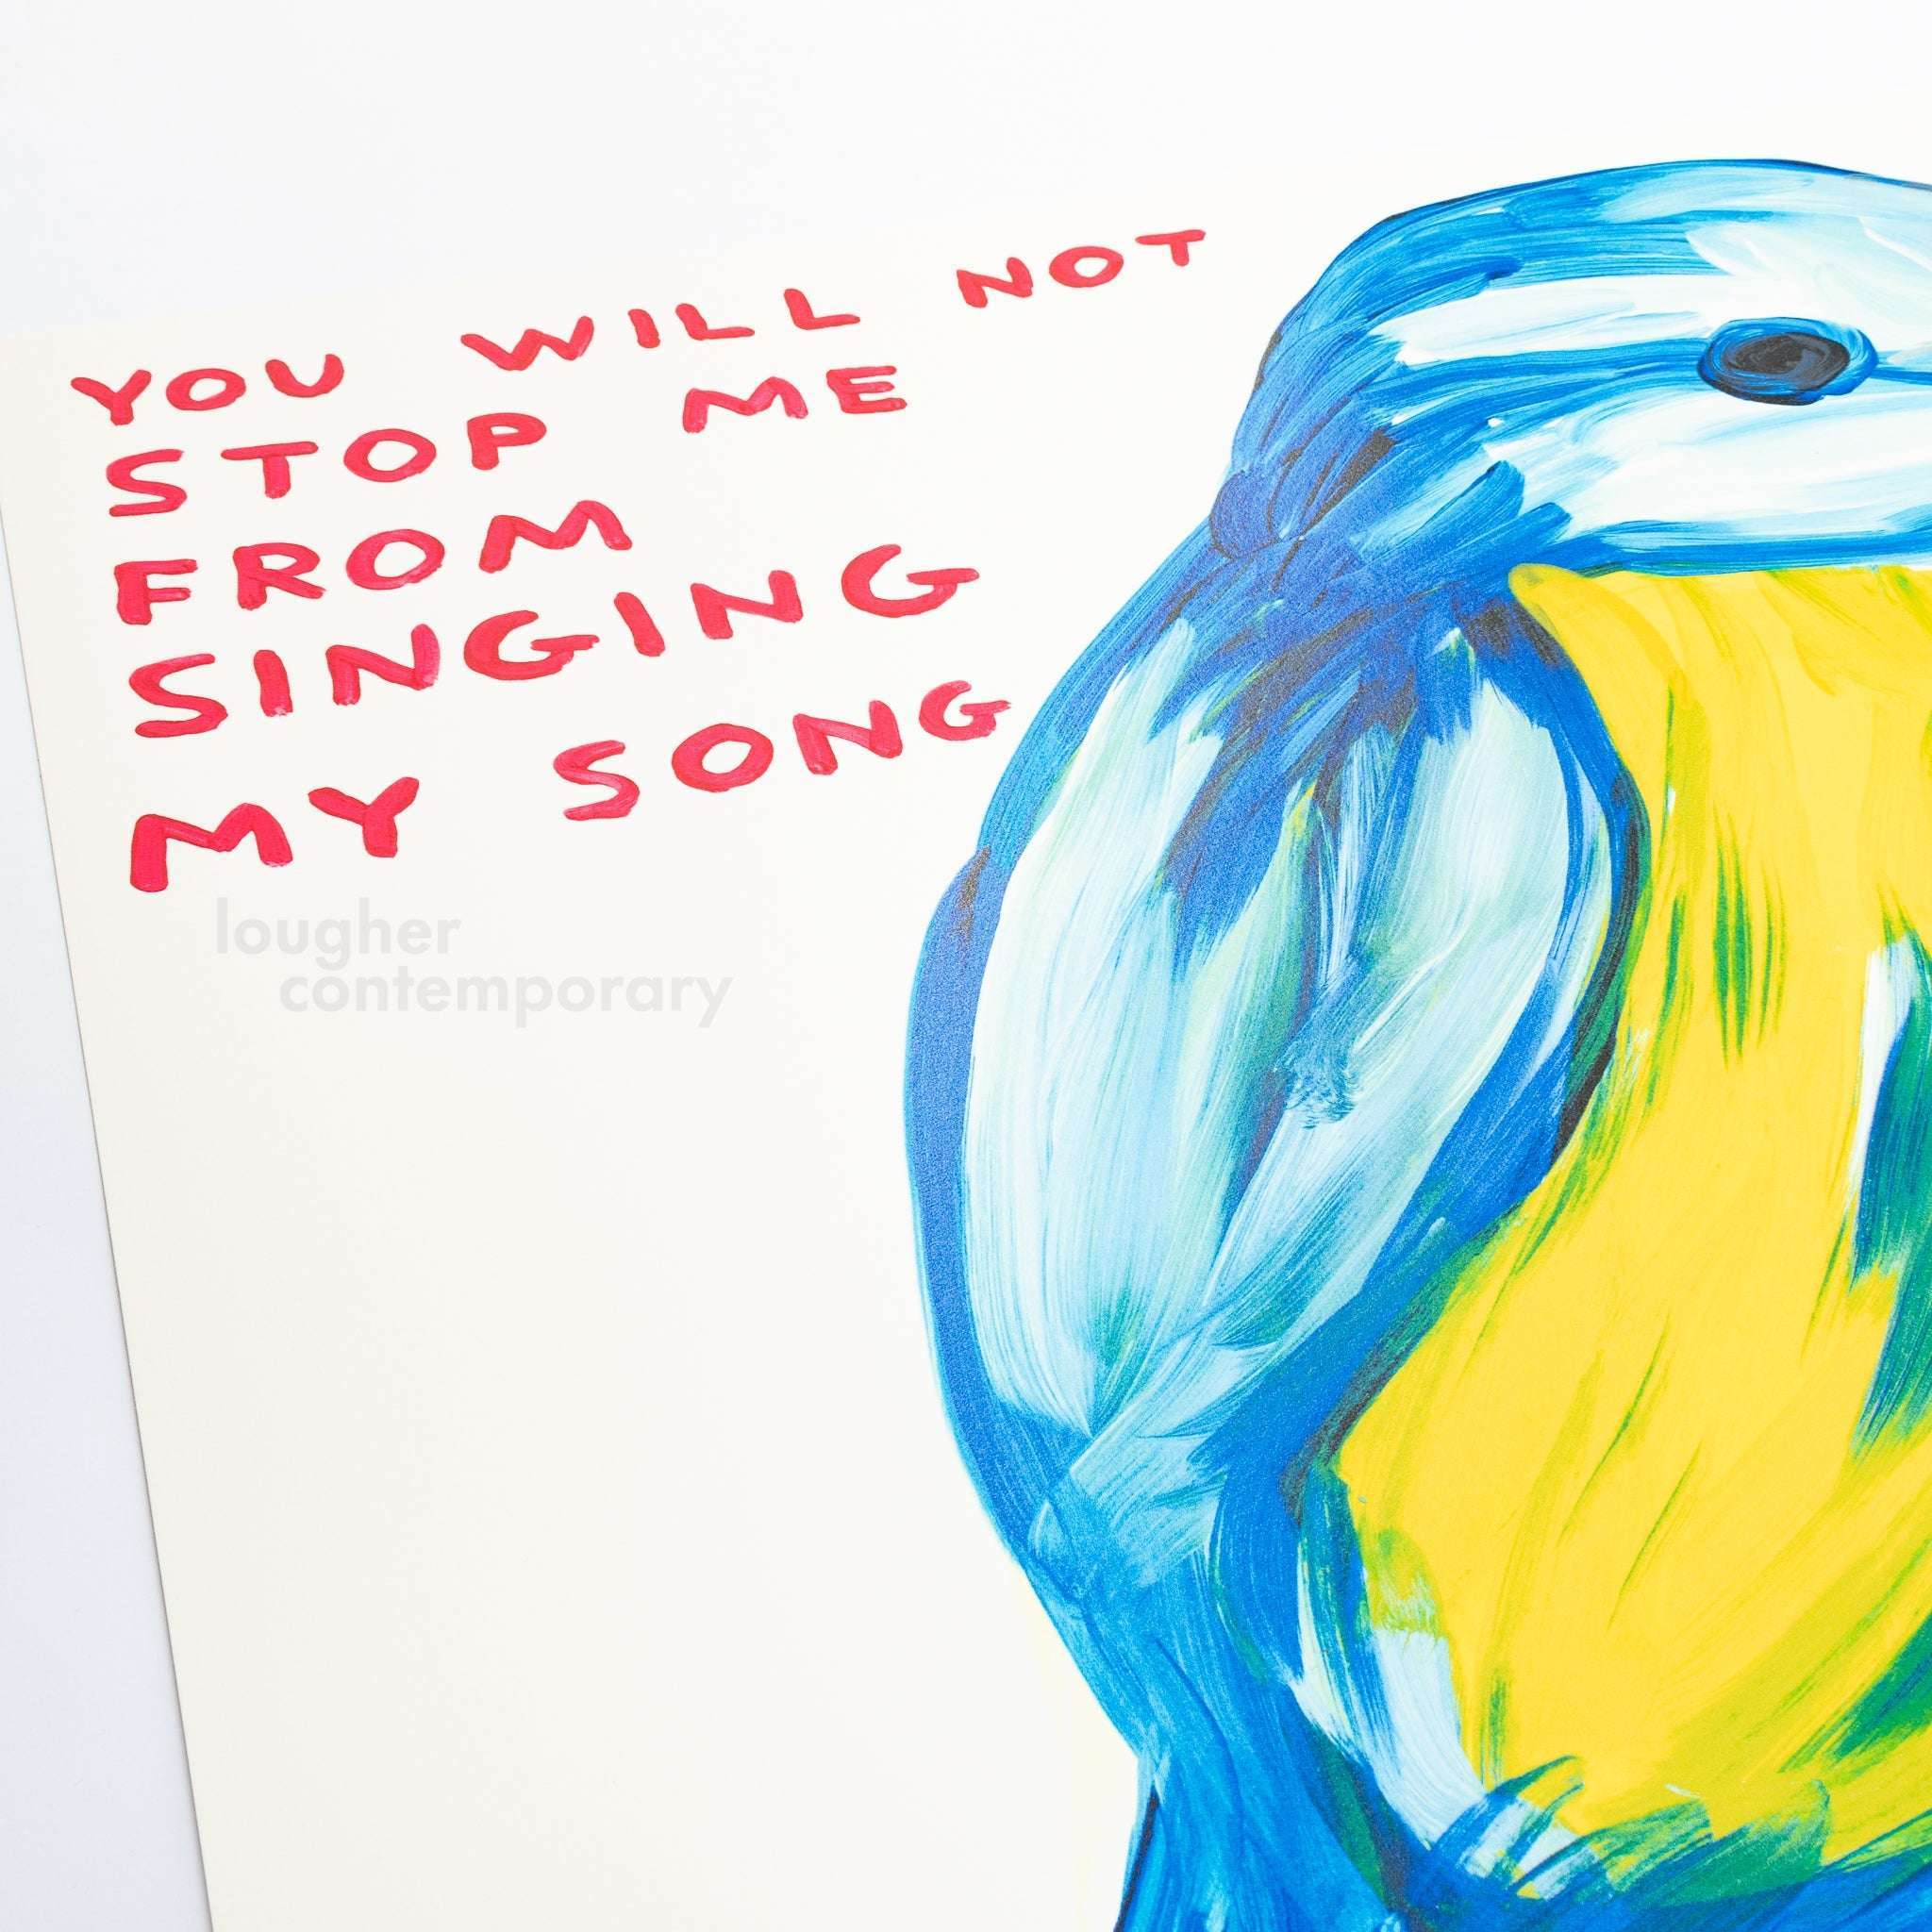 David Shrigley, You Will Not Stop Me From Singing My Song, 2021 For Sale - Lougher Contemporary